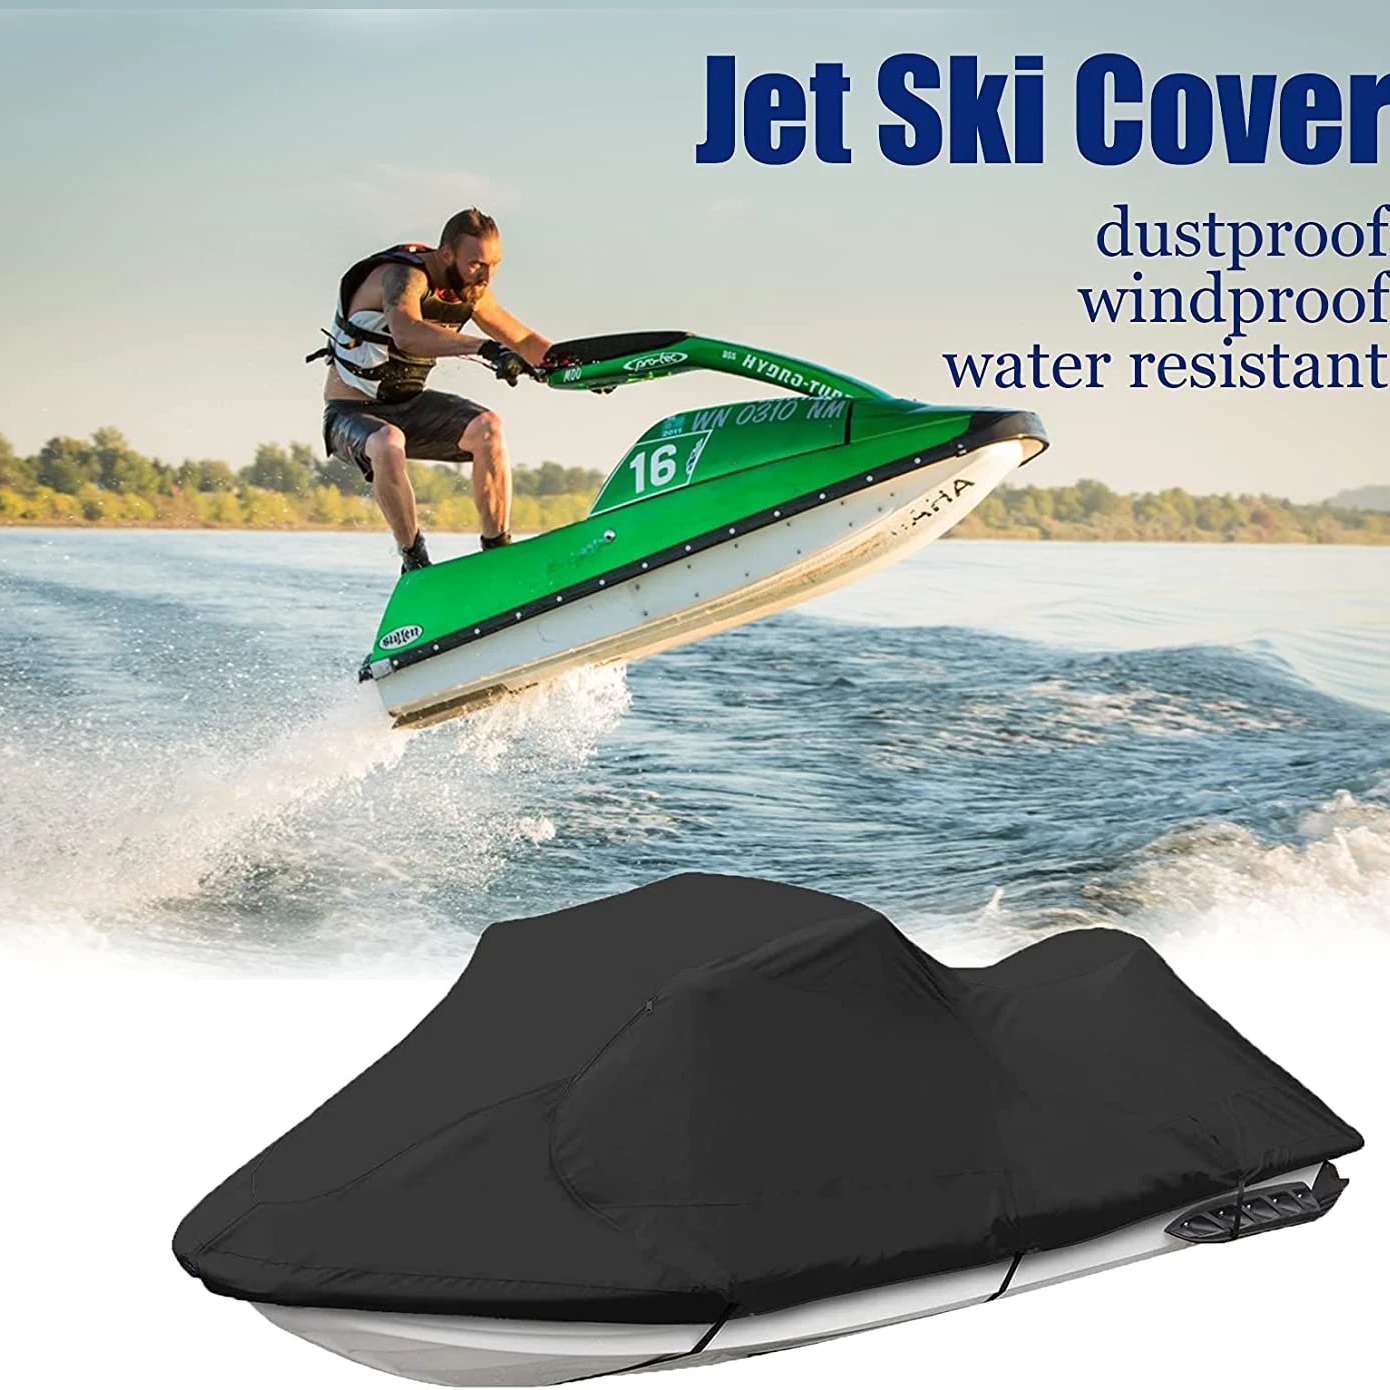 

Heavy-duty waterproof sunscreen jet ski cover, marine motor cover, V-shaped boat trailer motorboat cover customized